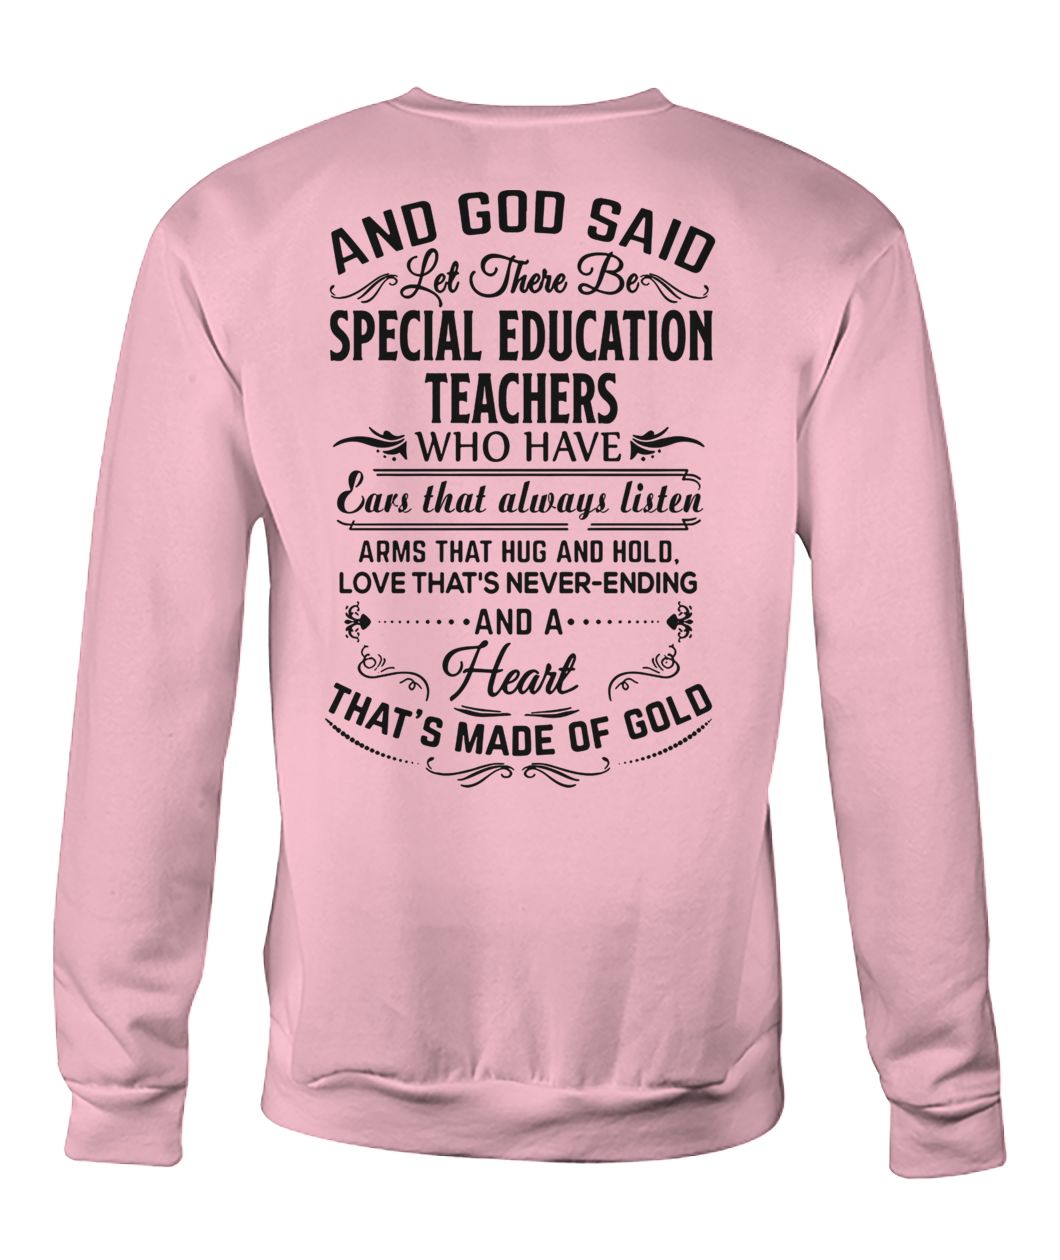 And God said let there be special education teachers crew neck sweatshirt